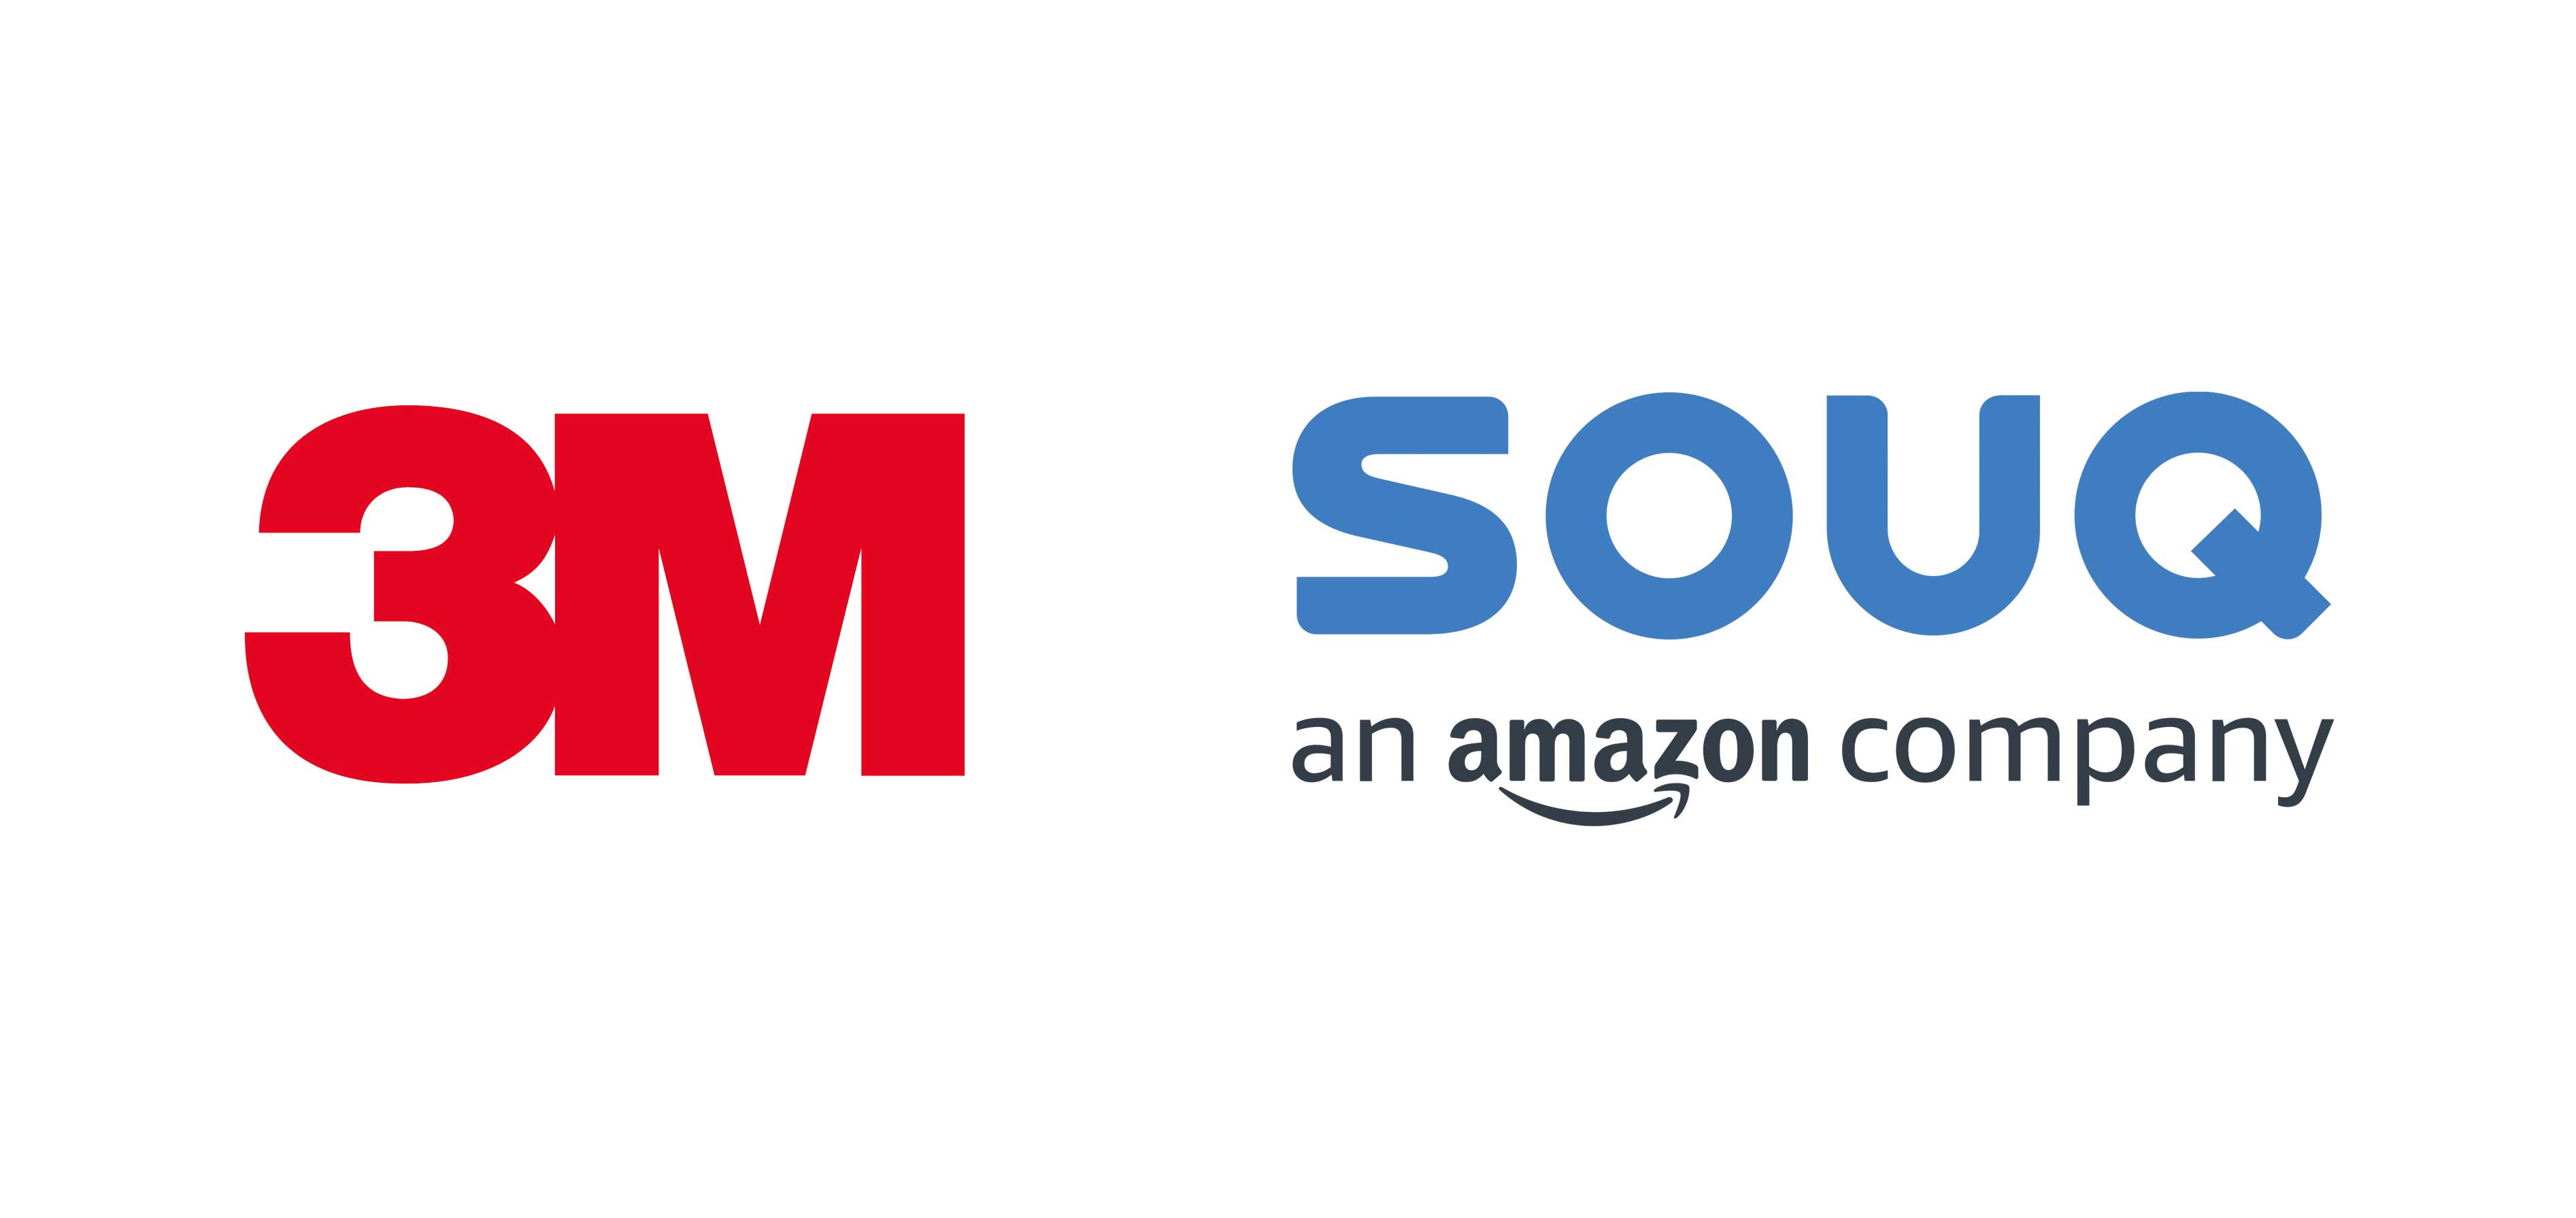 SOUQ to feature Innovative Products from 3M